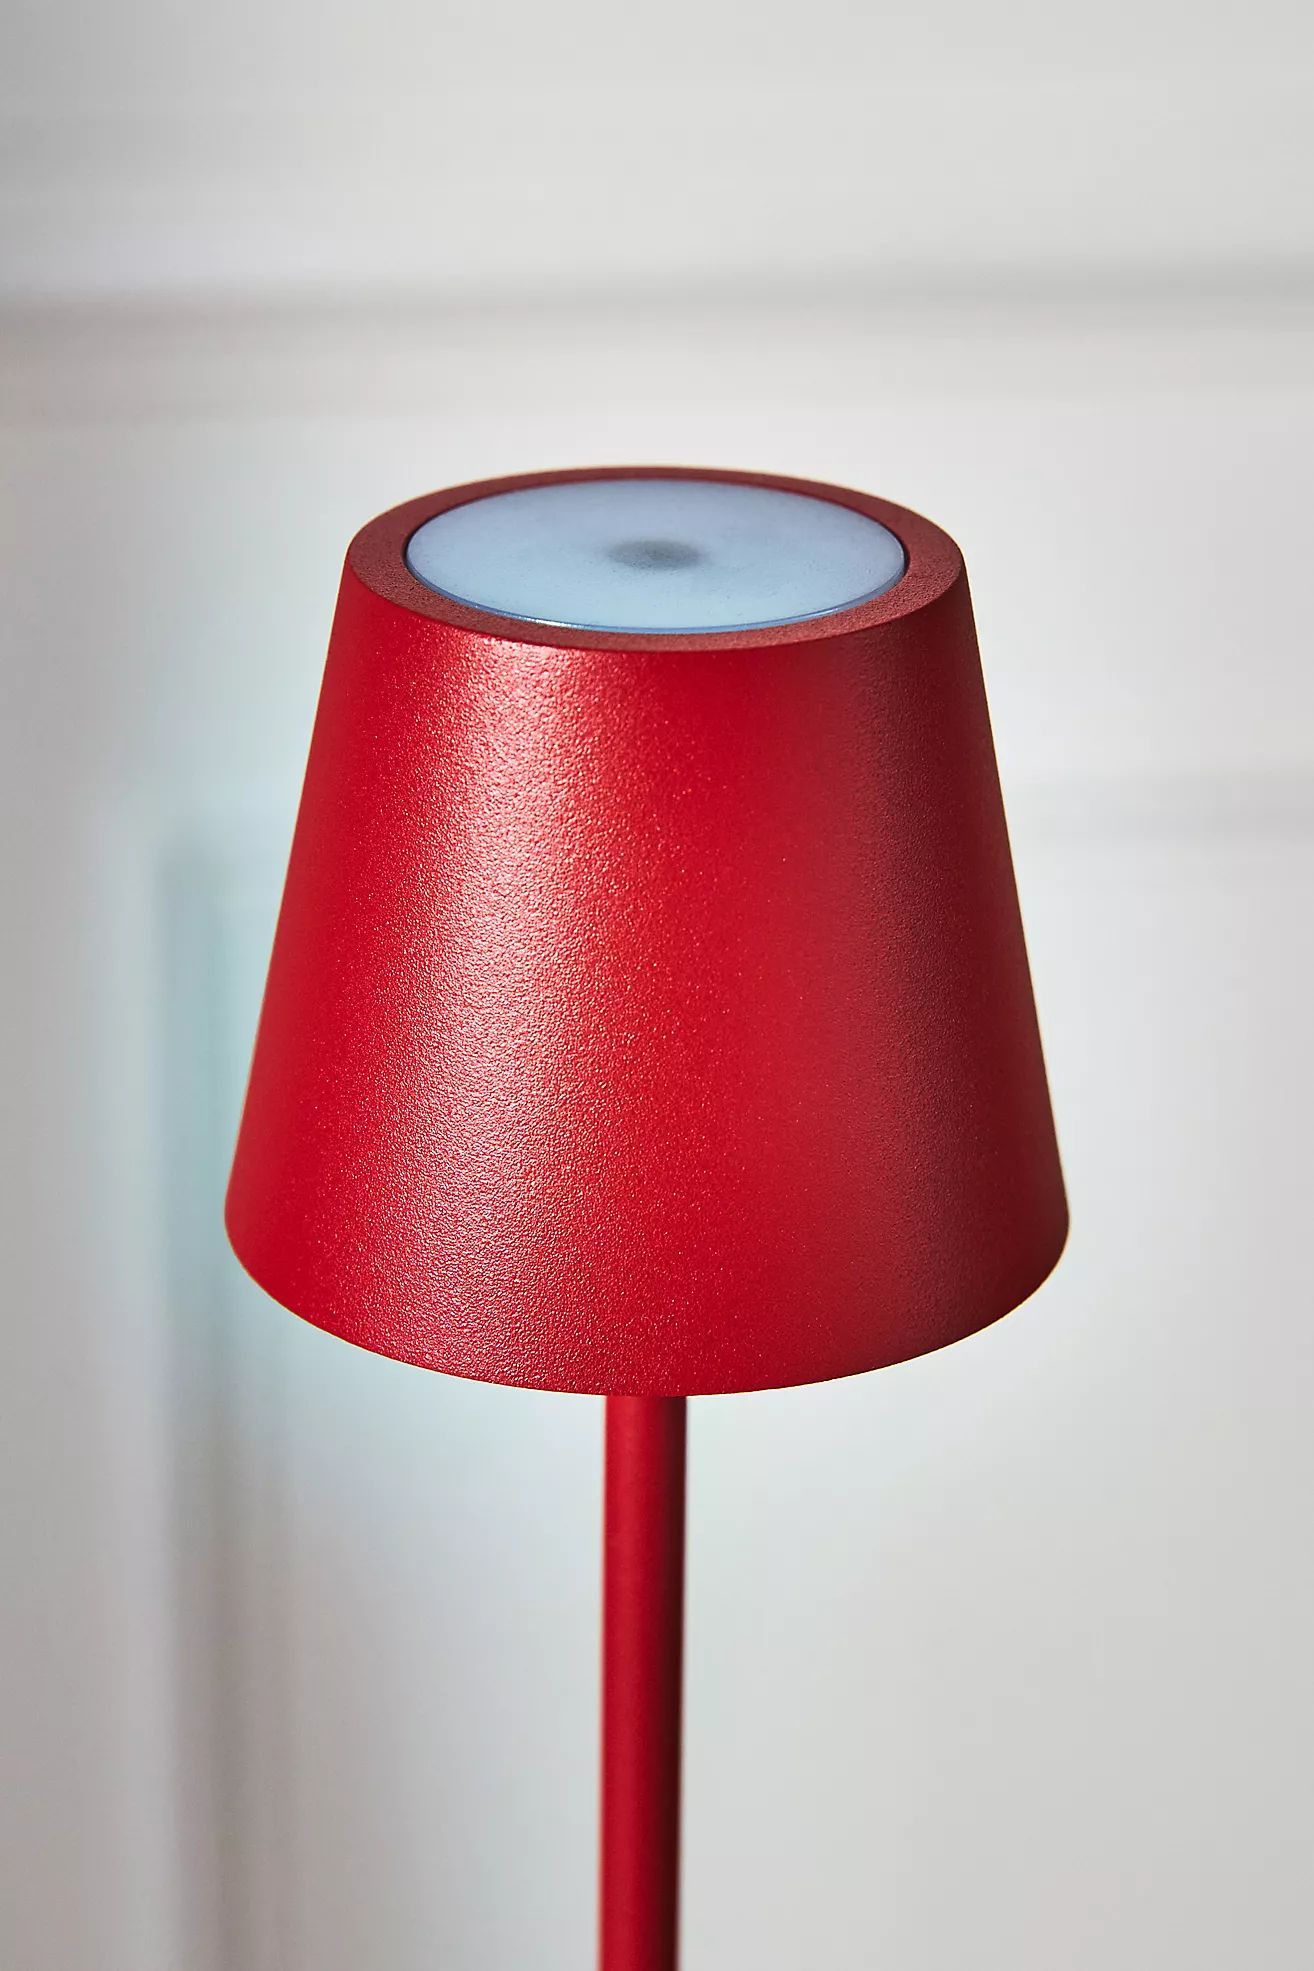 Poldina Pro Micro Rechargeable LED Portable Table Lamp | Anthropologie (US)